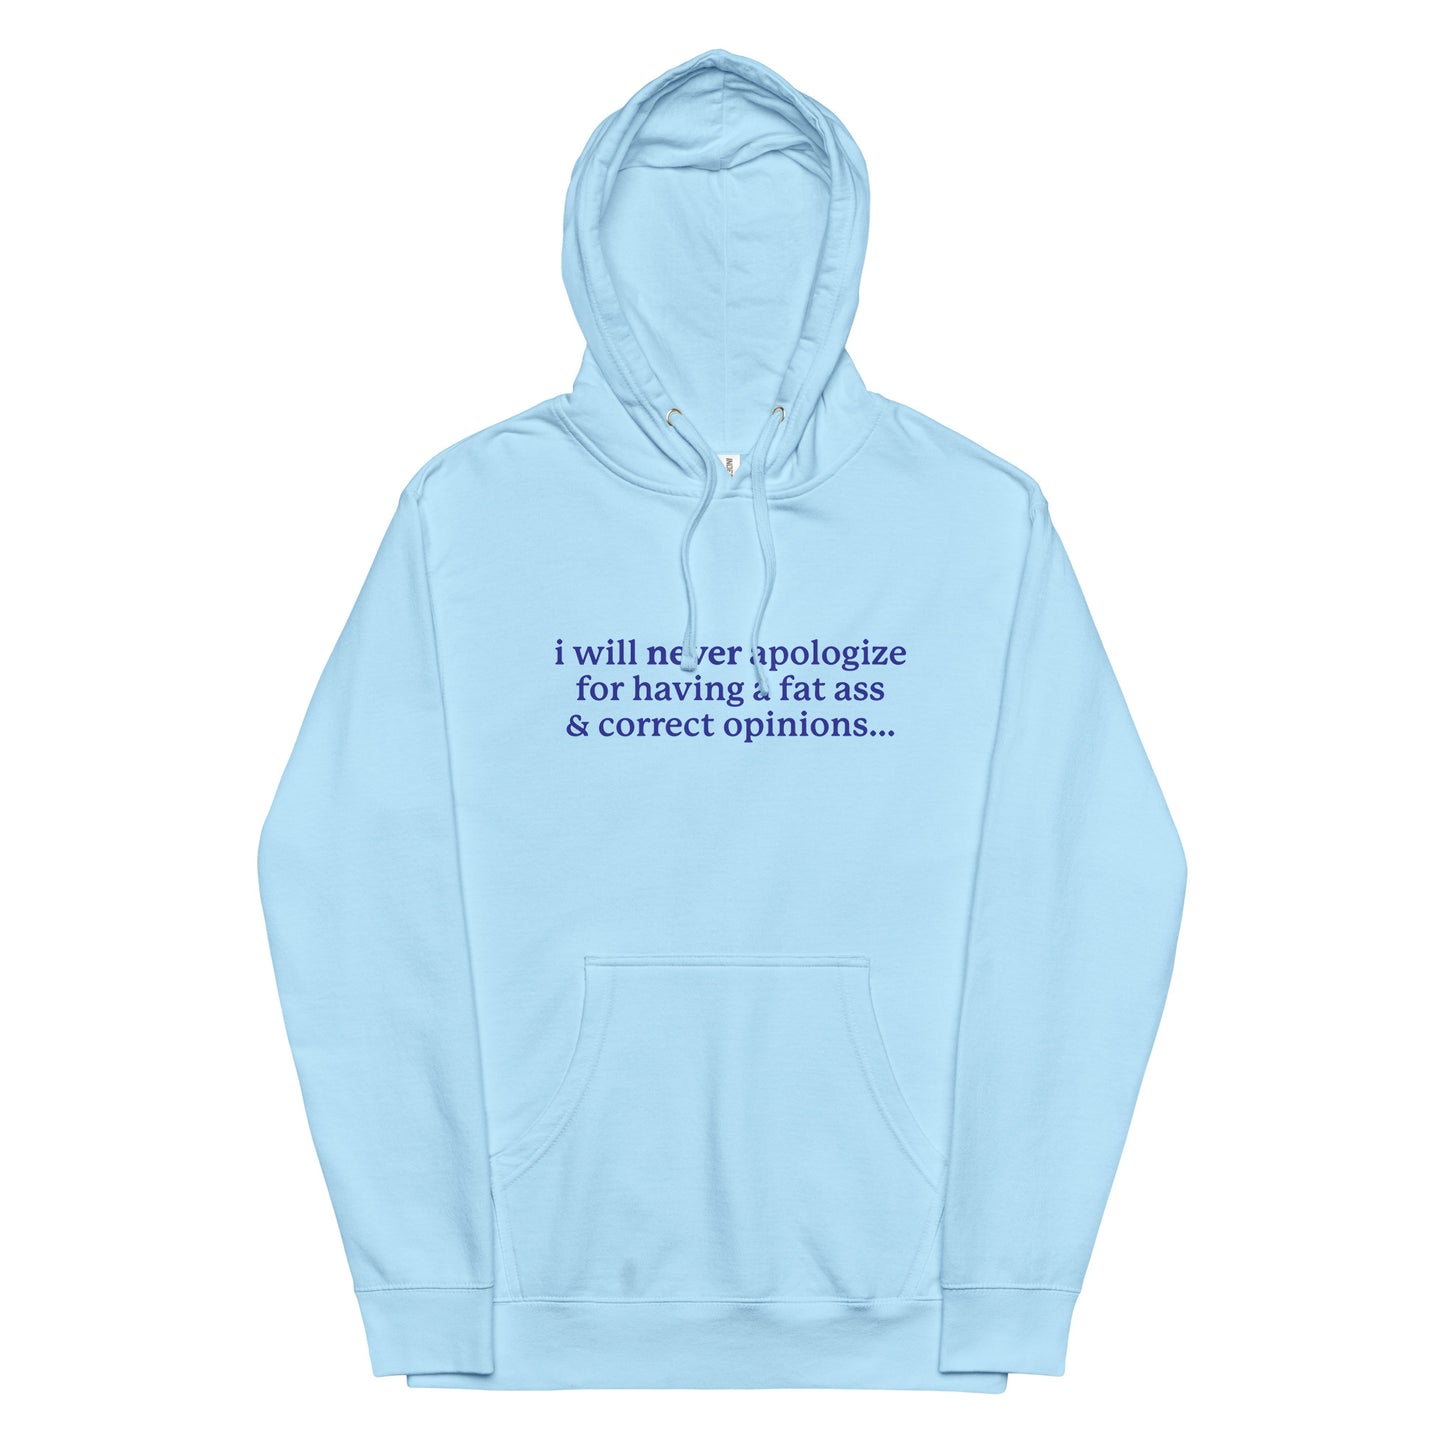 I Will Never Apologize (Fat Ass & Correct Opinions) Unisex hoodie